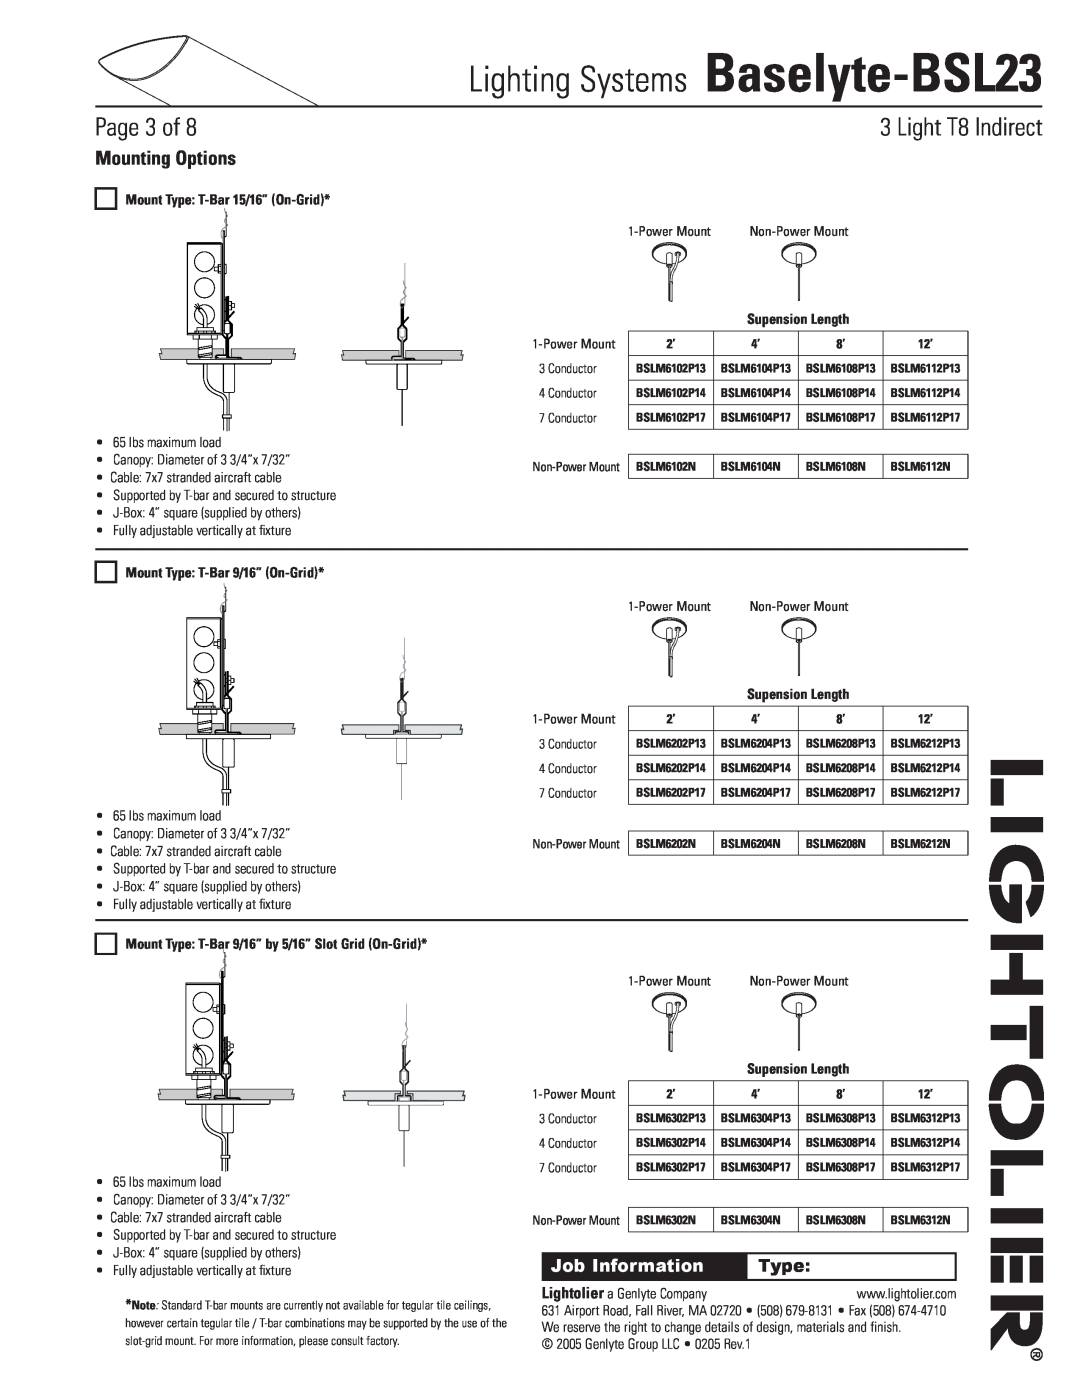 Lightolier Baselyte-BSL23 Mounting Options, Mount Type T-Bar15/16” On-Grid, Supension Length, Page of, Light T8 Indirect 